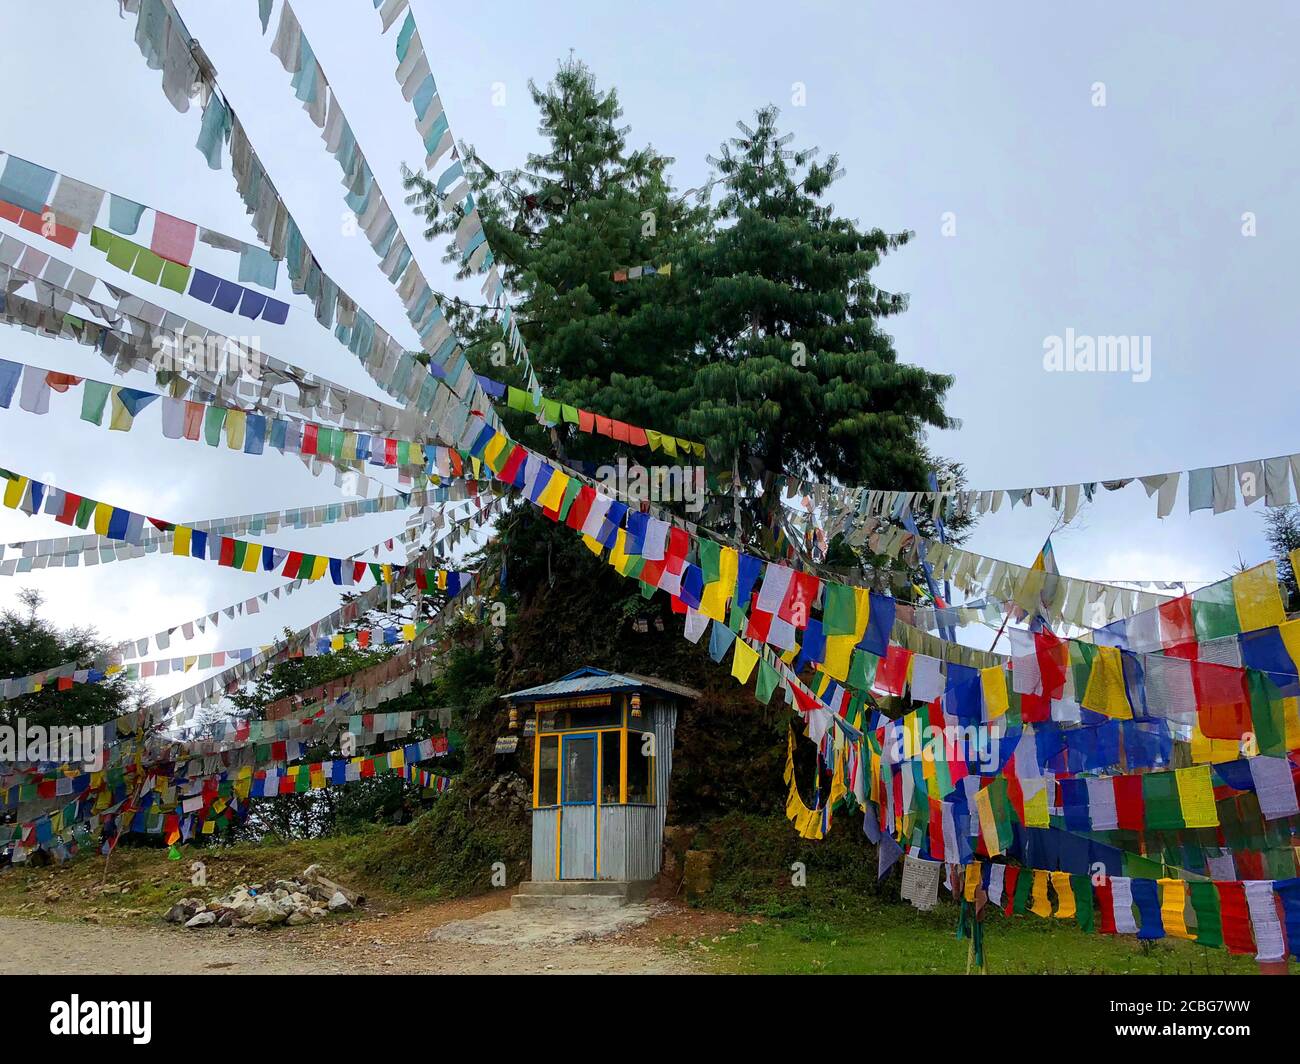 Prayer flags with mantras and prayers (for liberation from suffering, for long life, for compassion) that are carried when tossed about by the wind. Stock Photo